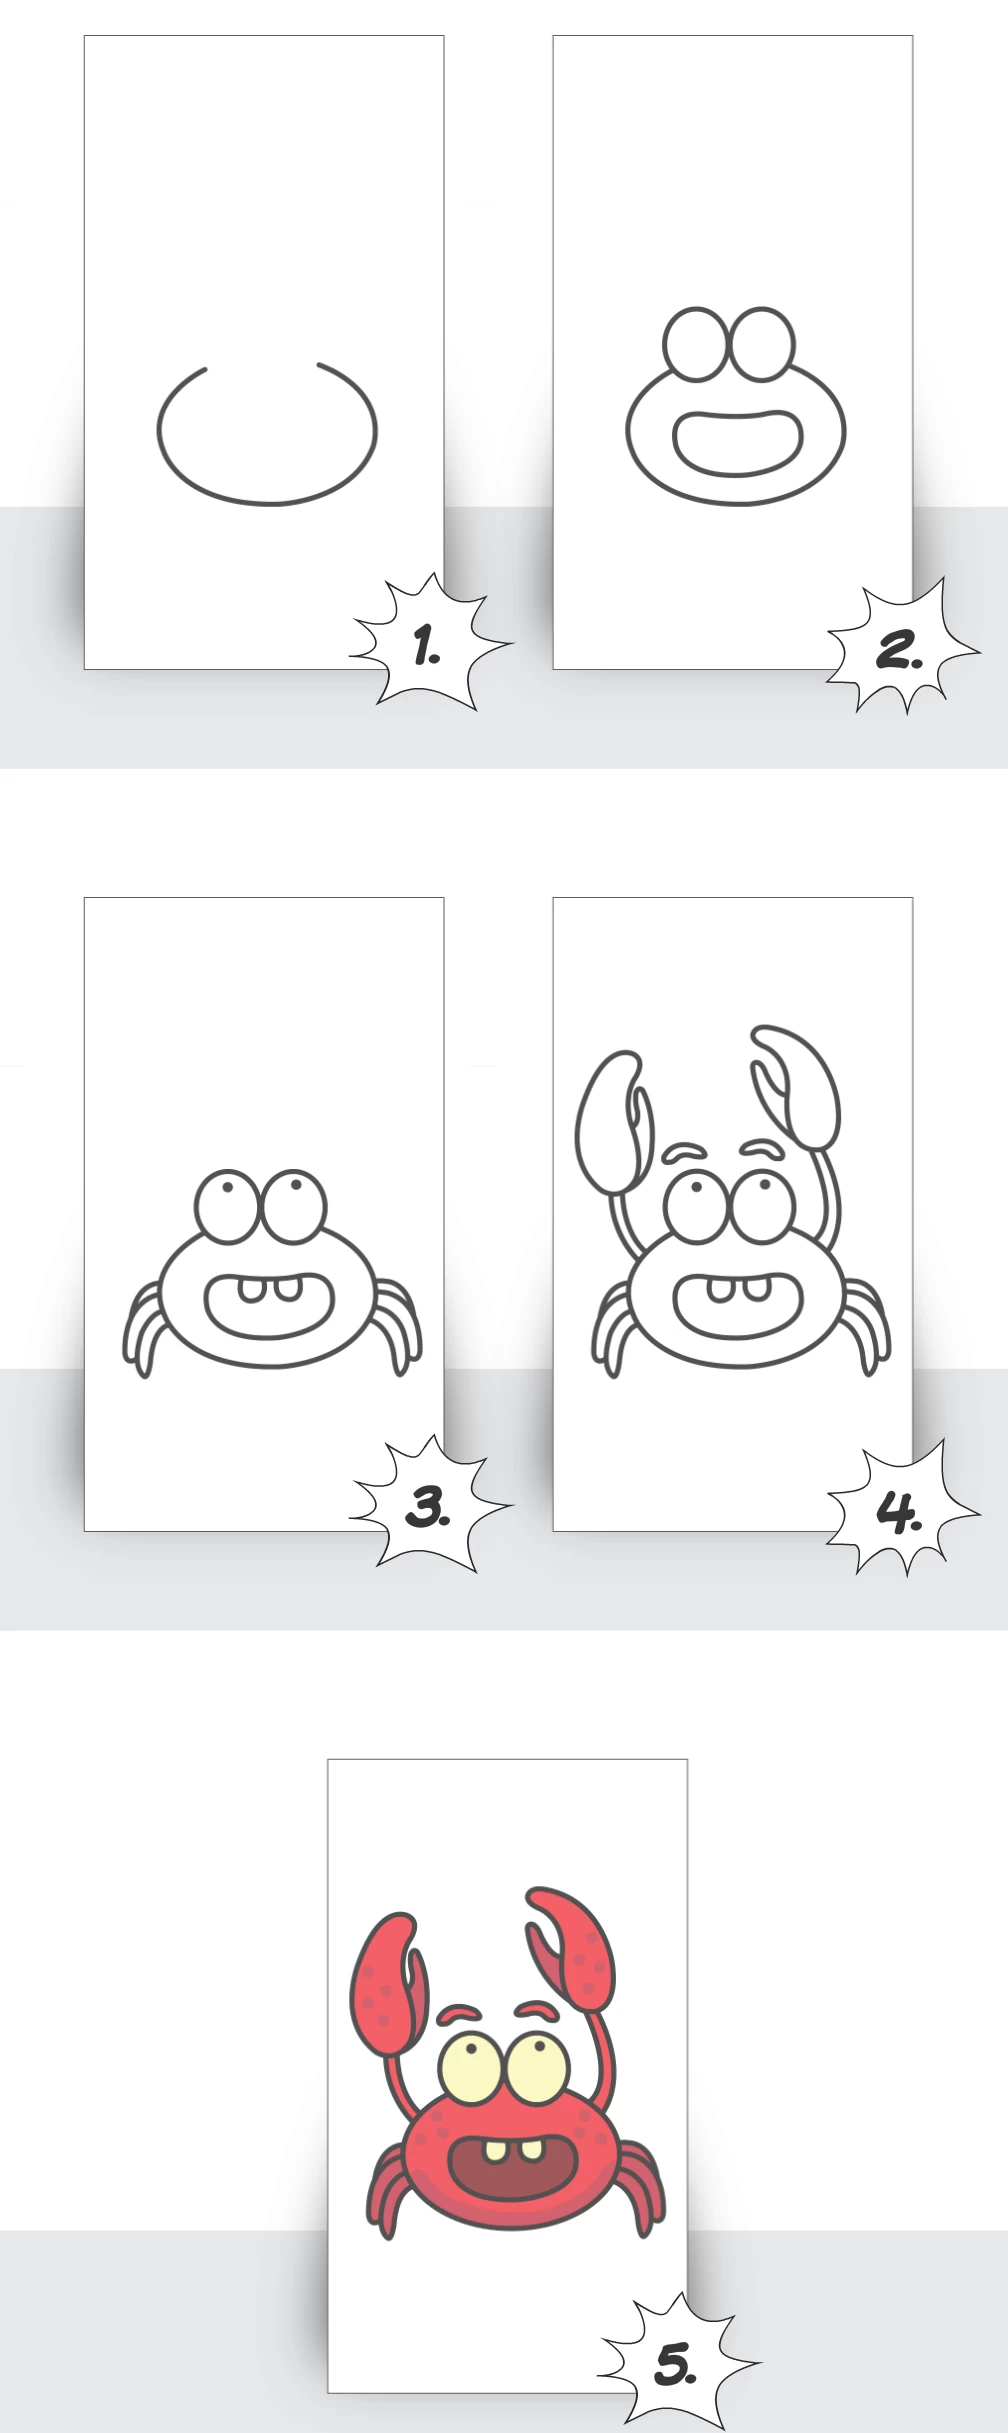 How to Draw a Crab Step by Step for Kids